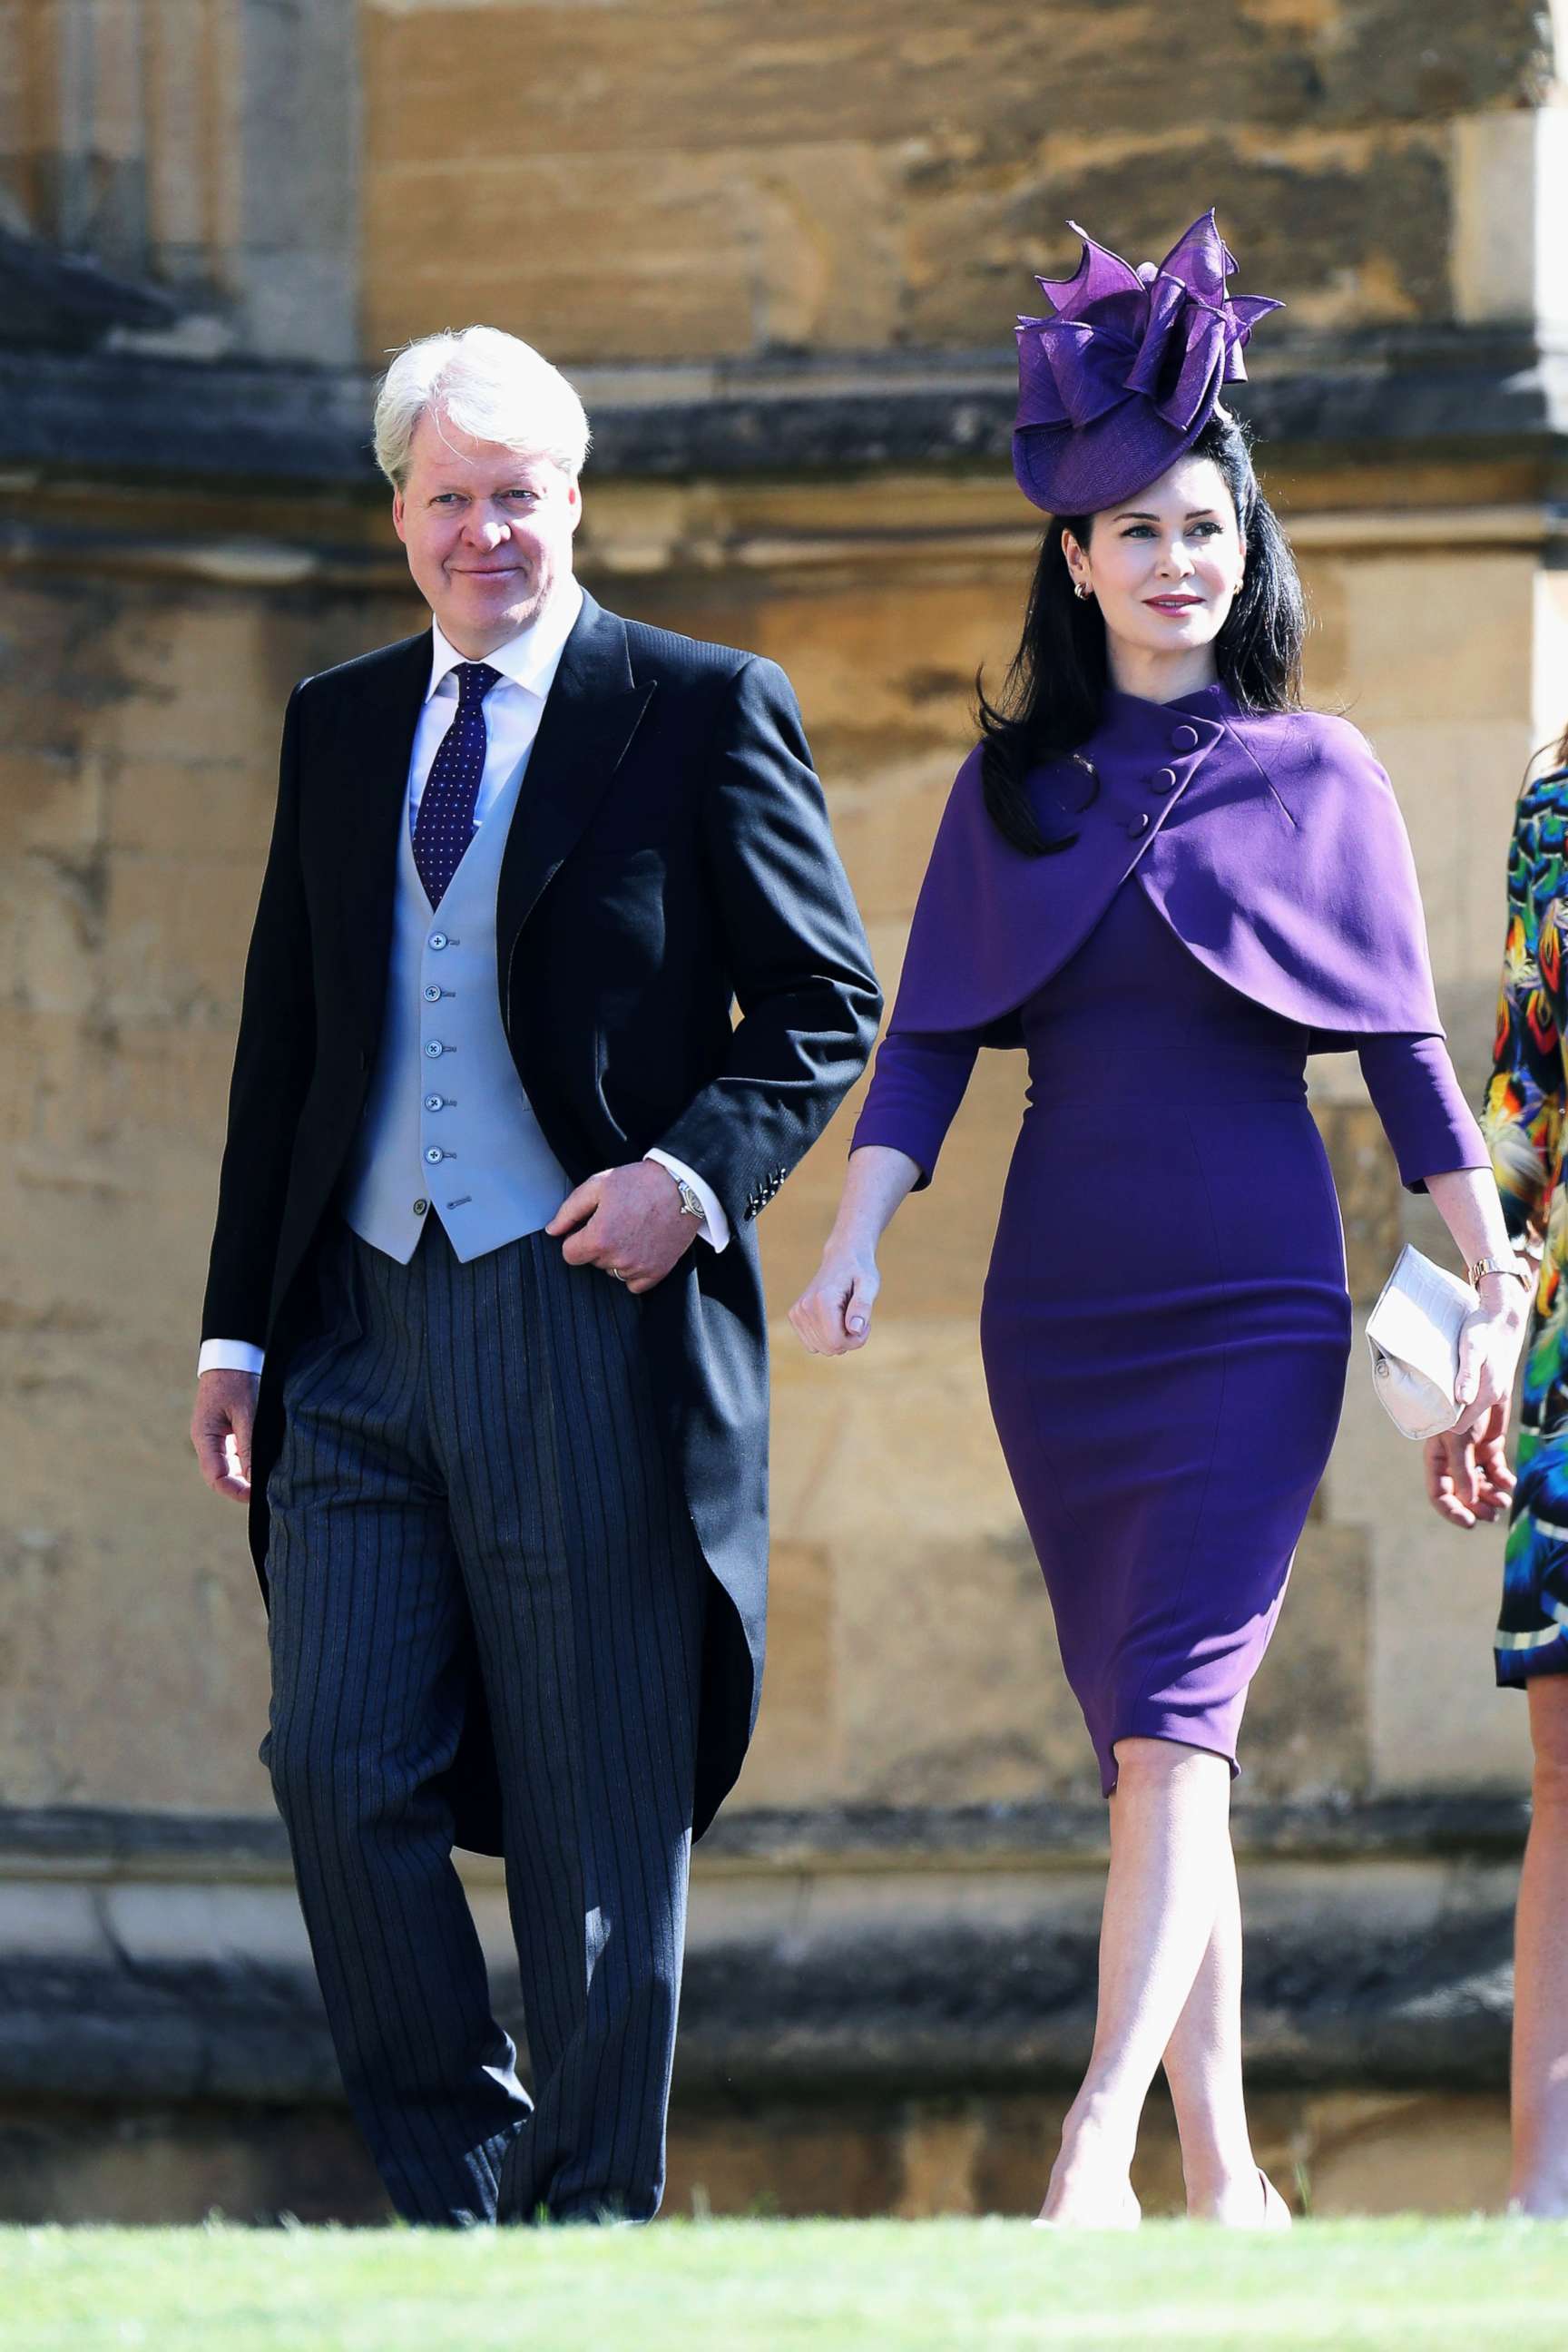 PHOTO: Charles Spencer, 9th Earl Spencer and Karen Spencer arrive at the wedding of Prince Harry to Meghan Markle at St George's Chapel, Windsor Castle, May 19, 2018, in Windsor, England. 